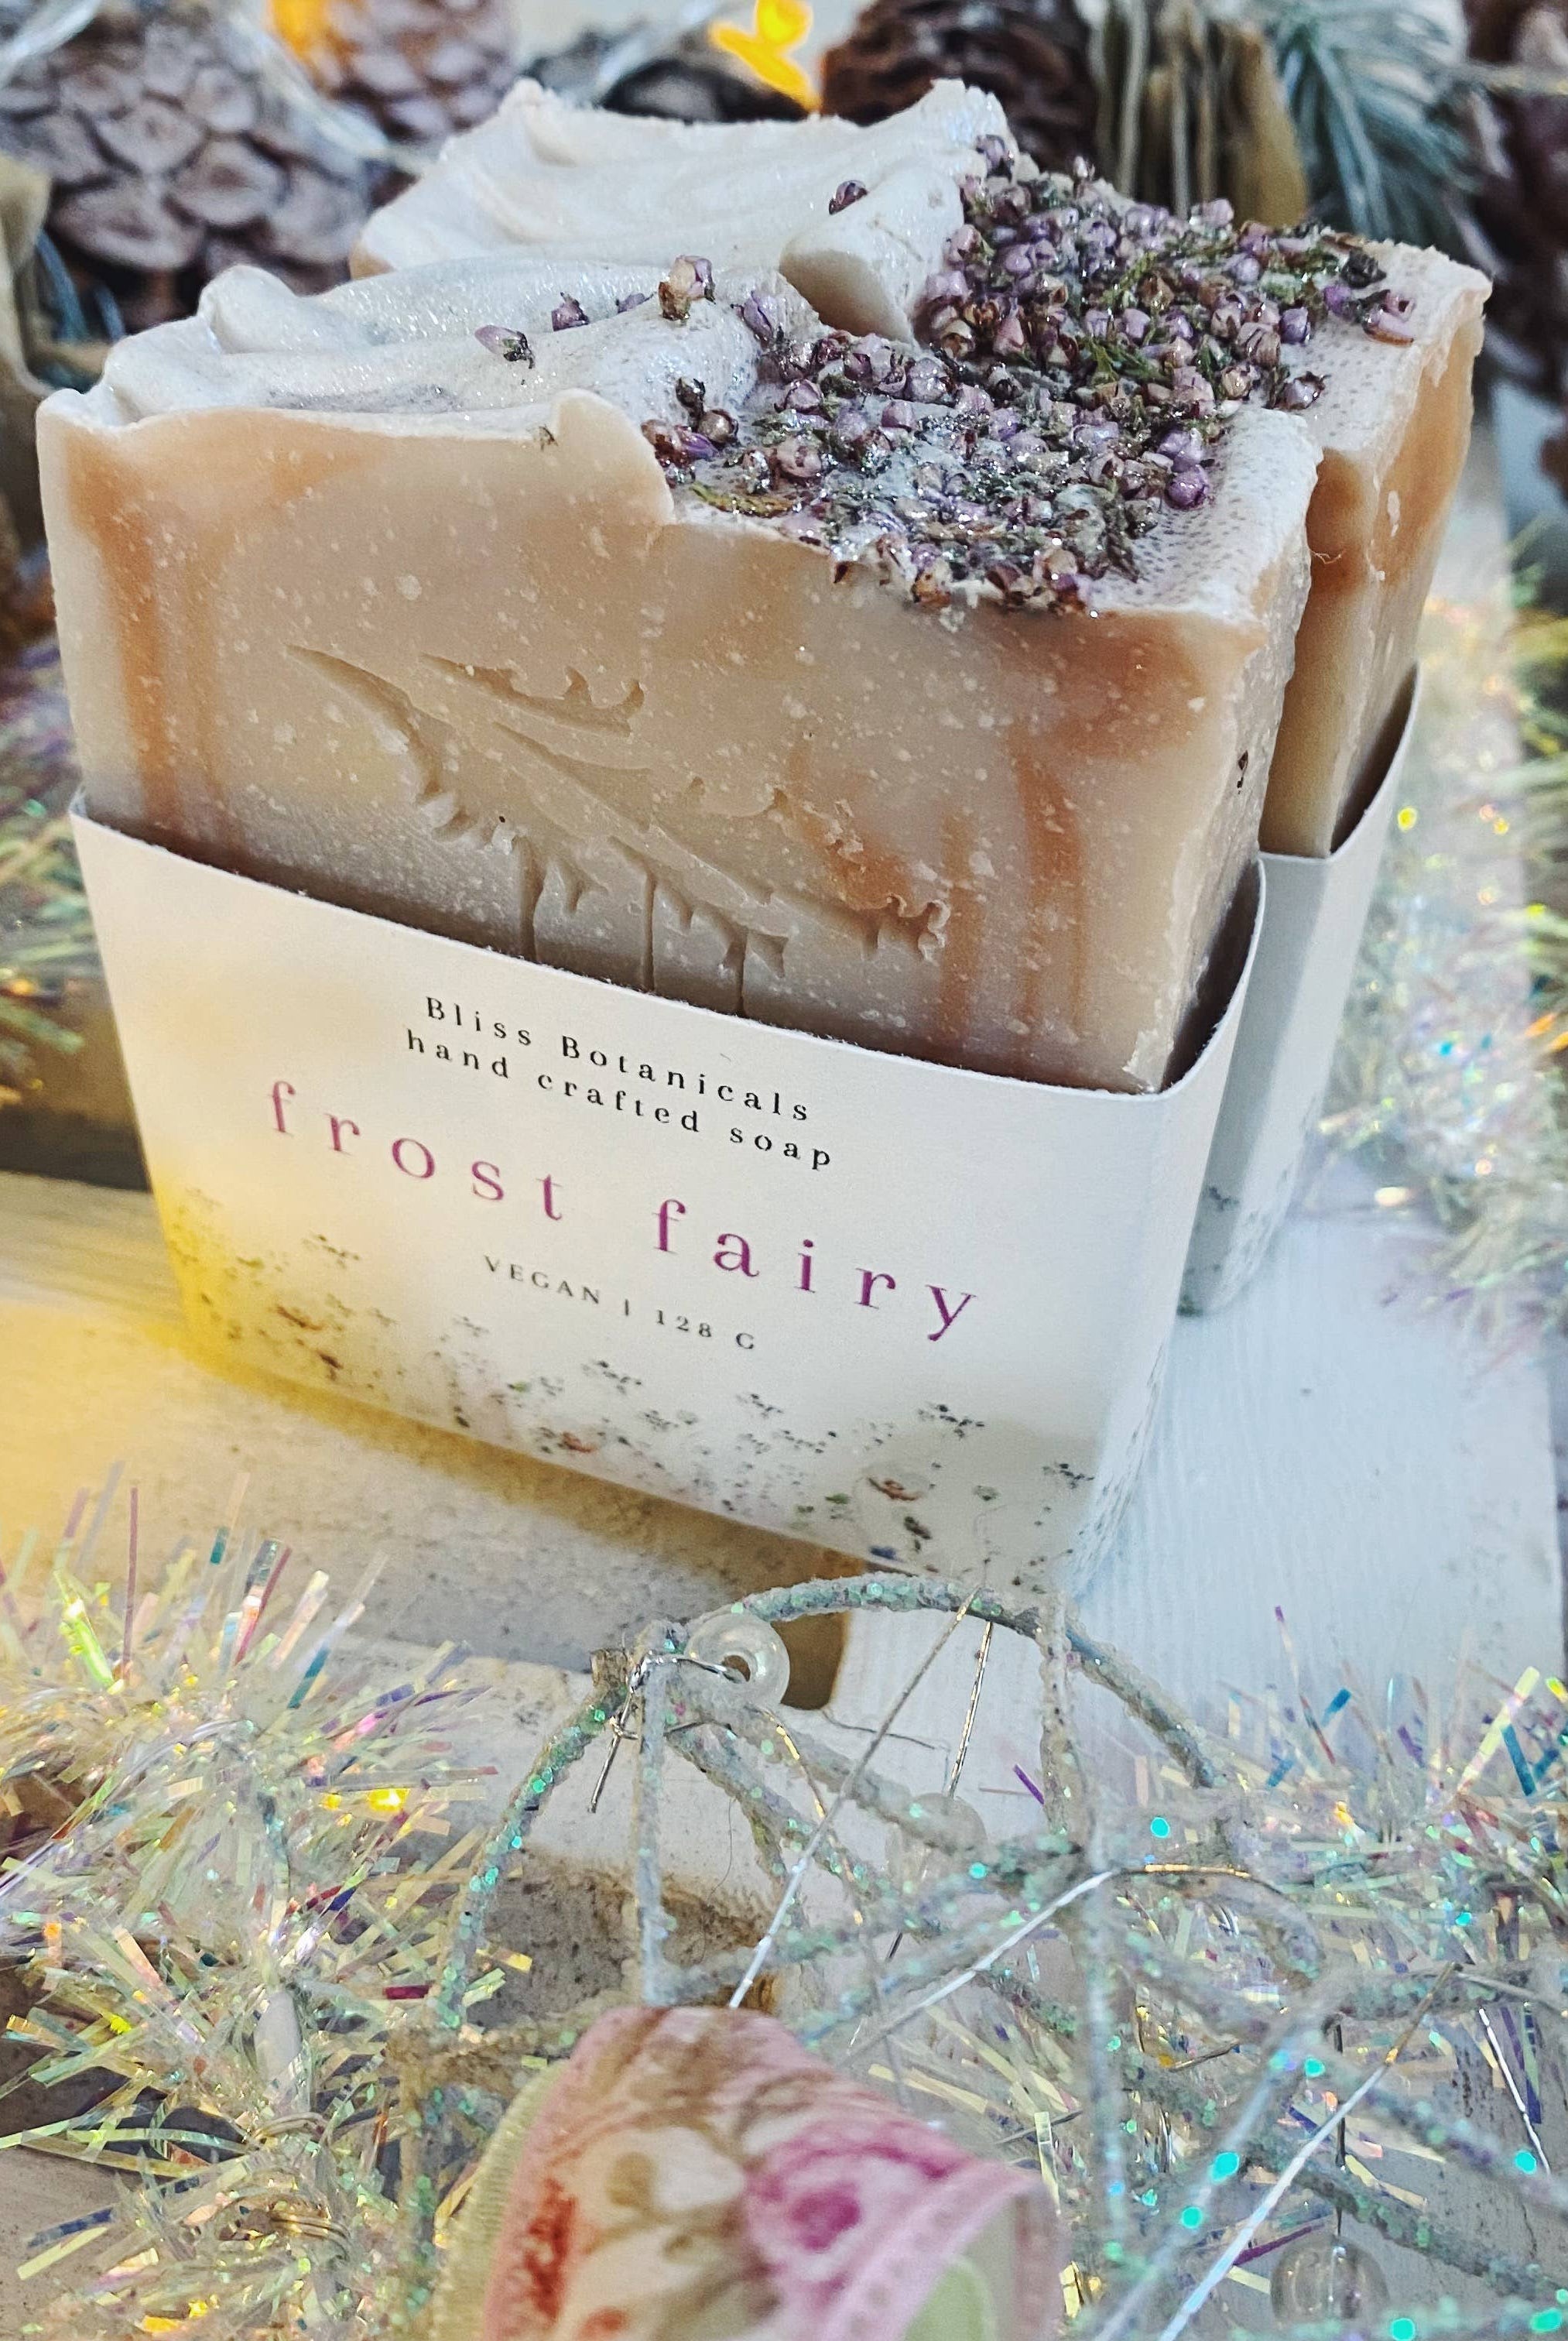 Handmade Bliss Botanicals Frost Fairy Soap displayed with pine cones and fairy lights on a rustic wooden surface.